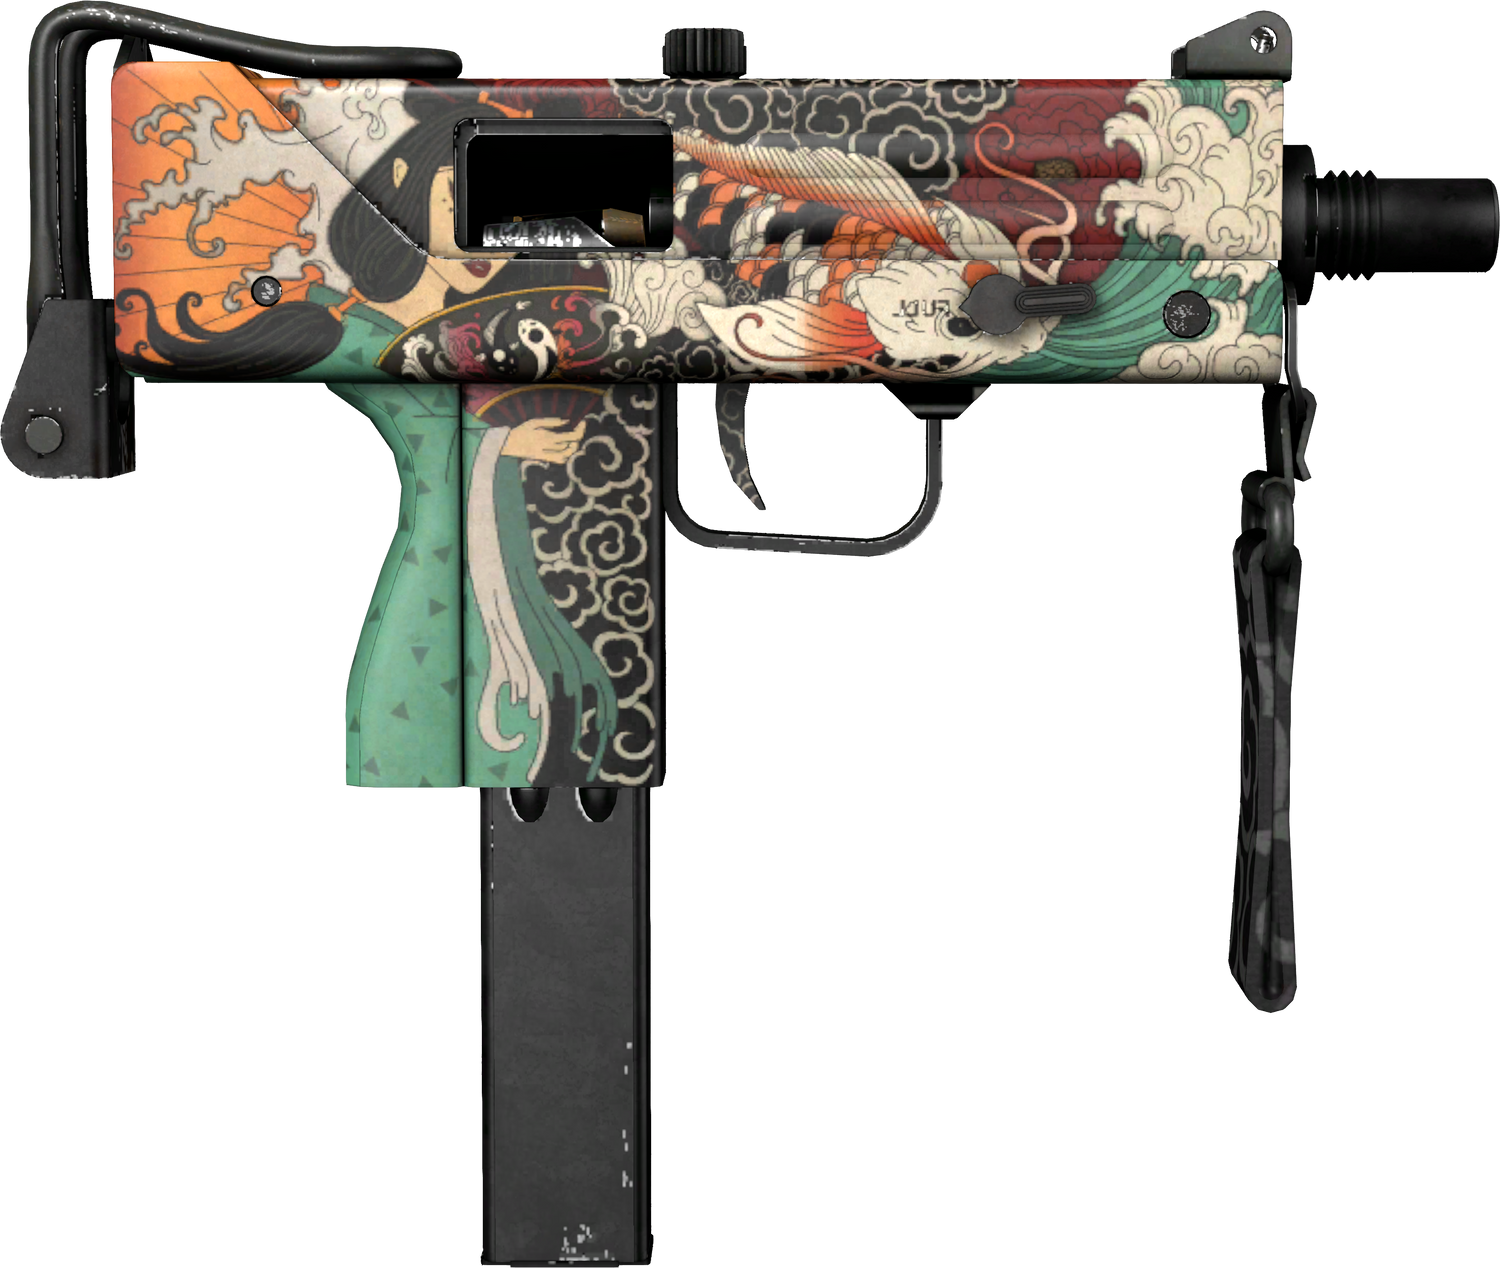 download the last version for iphoneMAC-10 Button Masher cs go skin